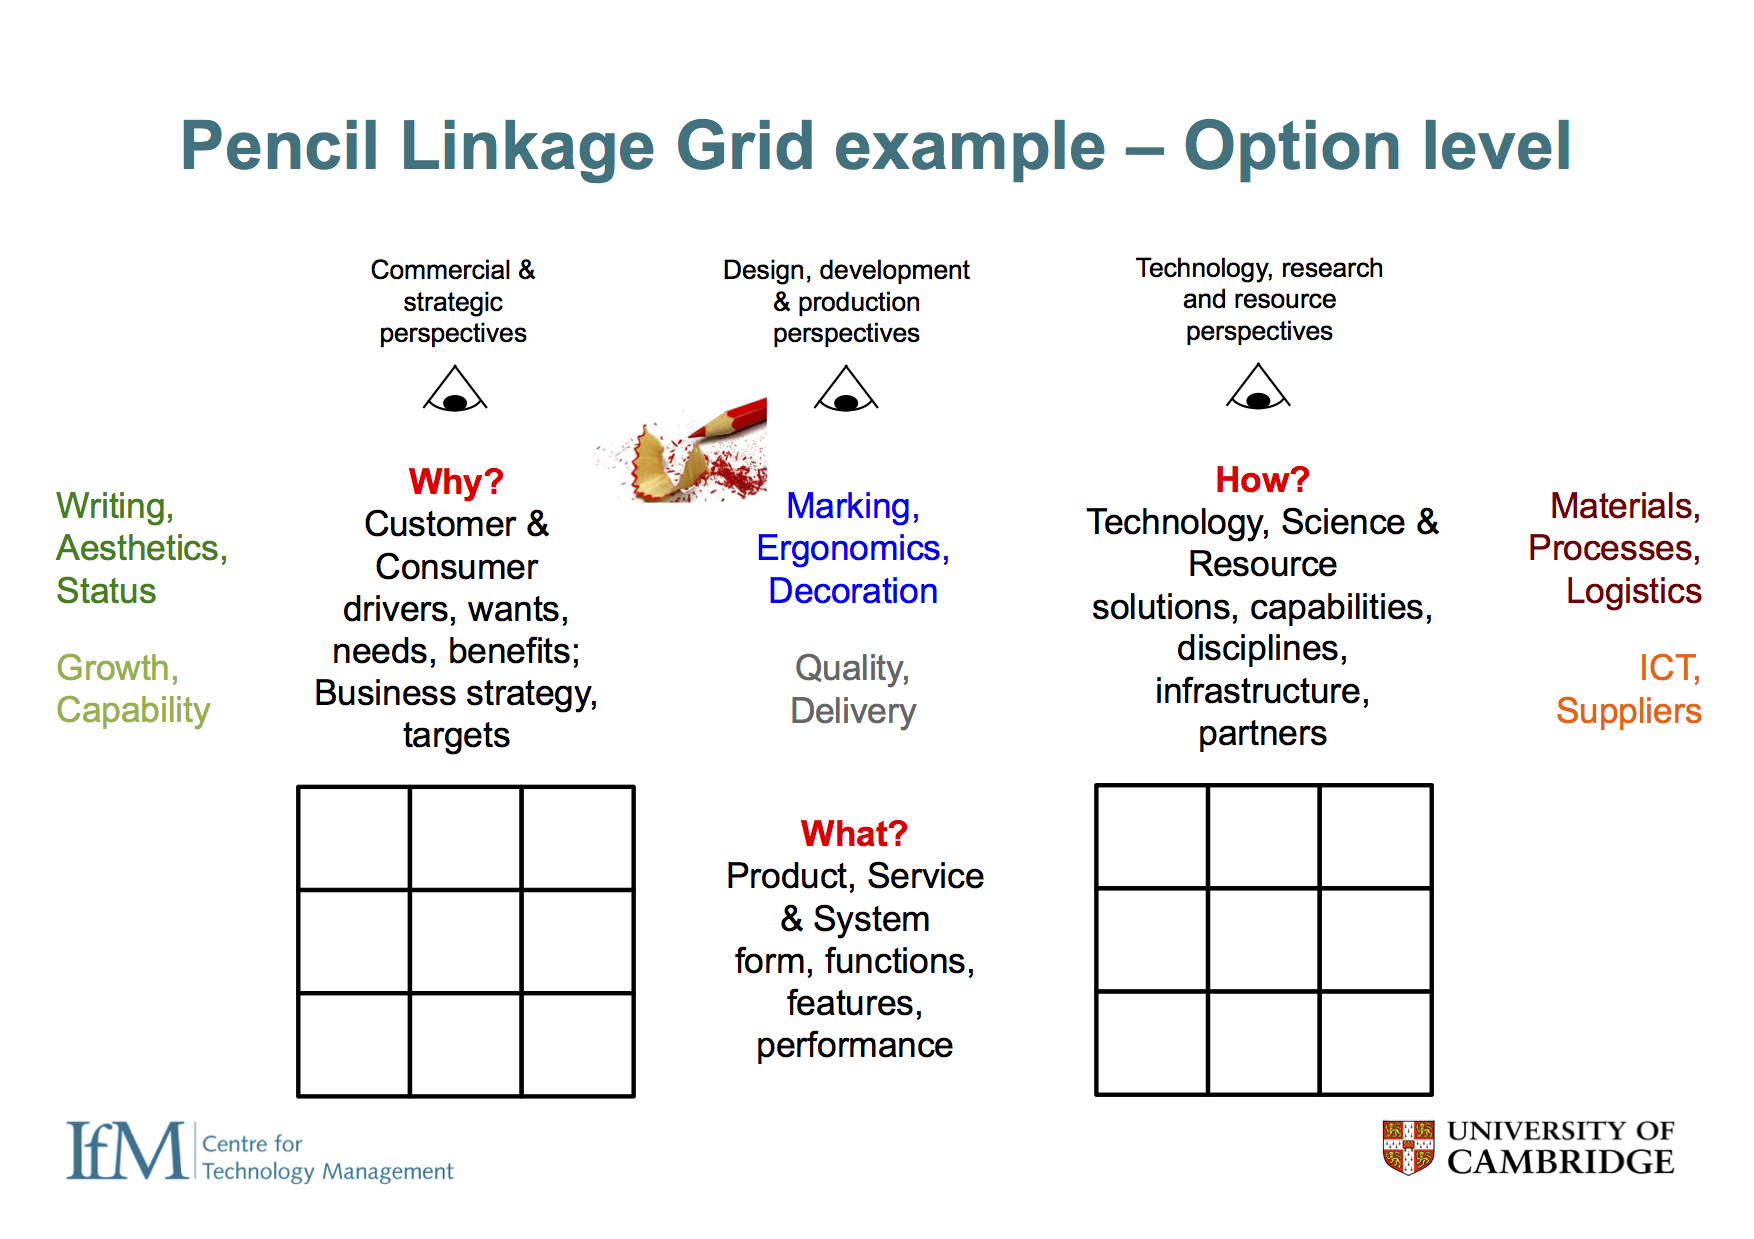  Focusing on the two core interlinked grids, sub-structure needs to be defined in terms of rows and columns of the grids, which correspond directly to sub-layers of the roadmap. At the 'option level' (one product of a business - e.g. a pencil), custo